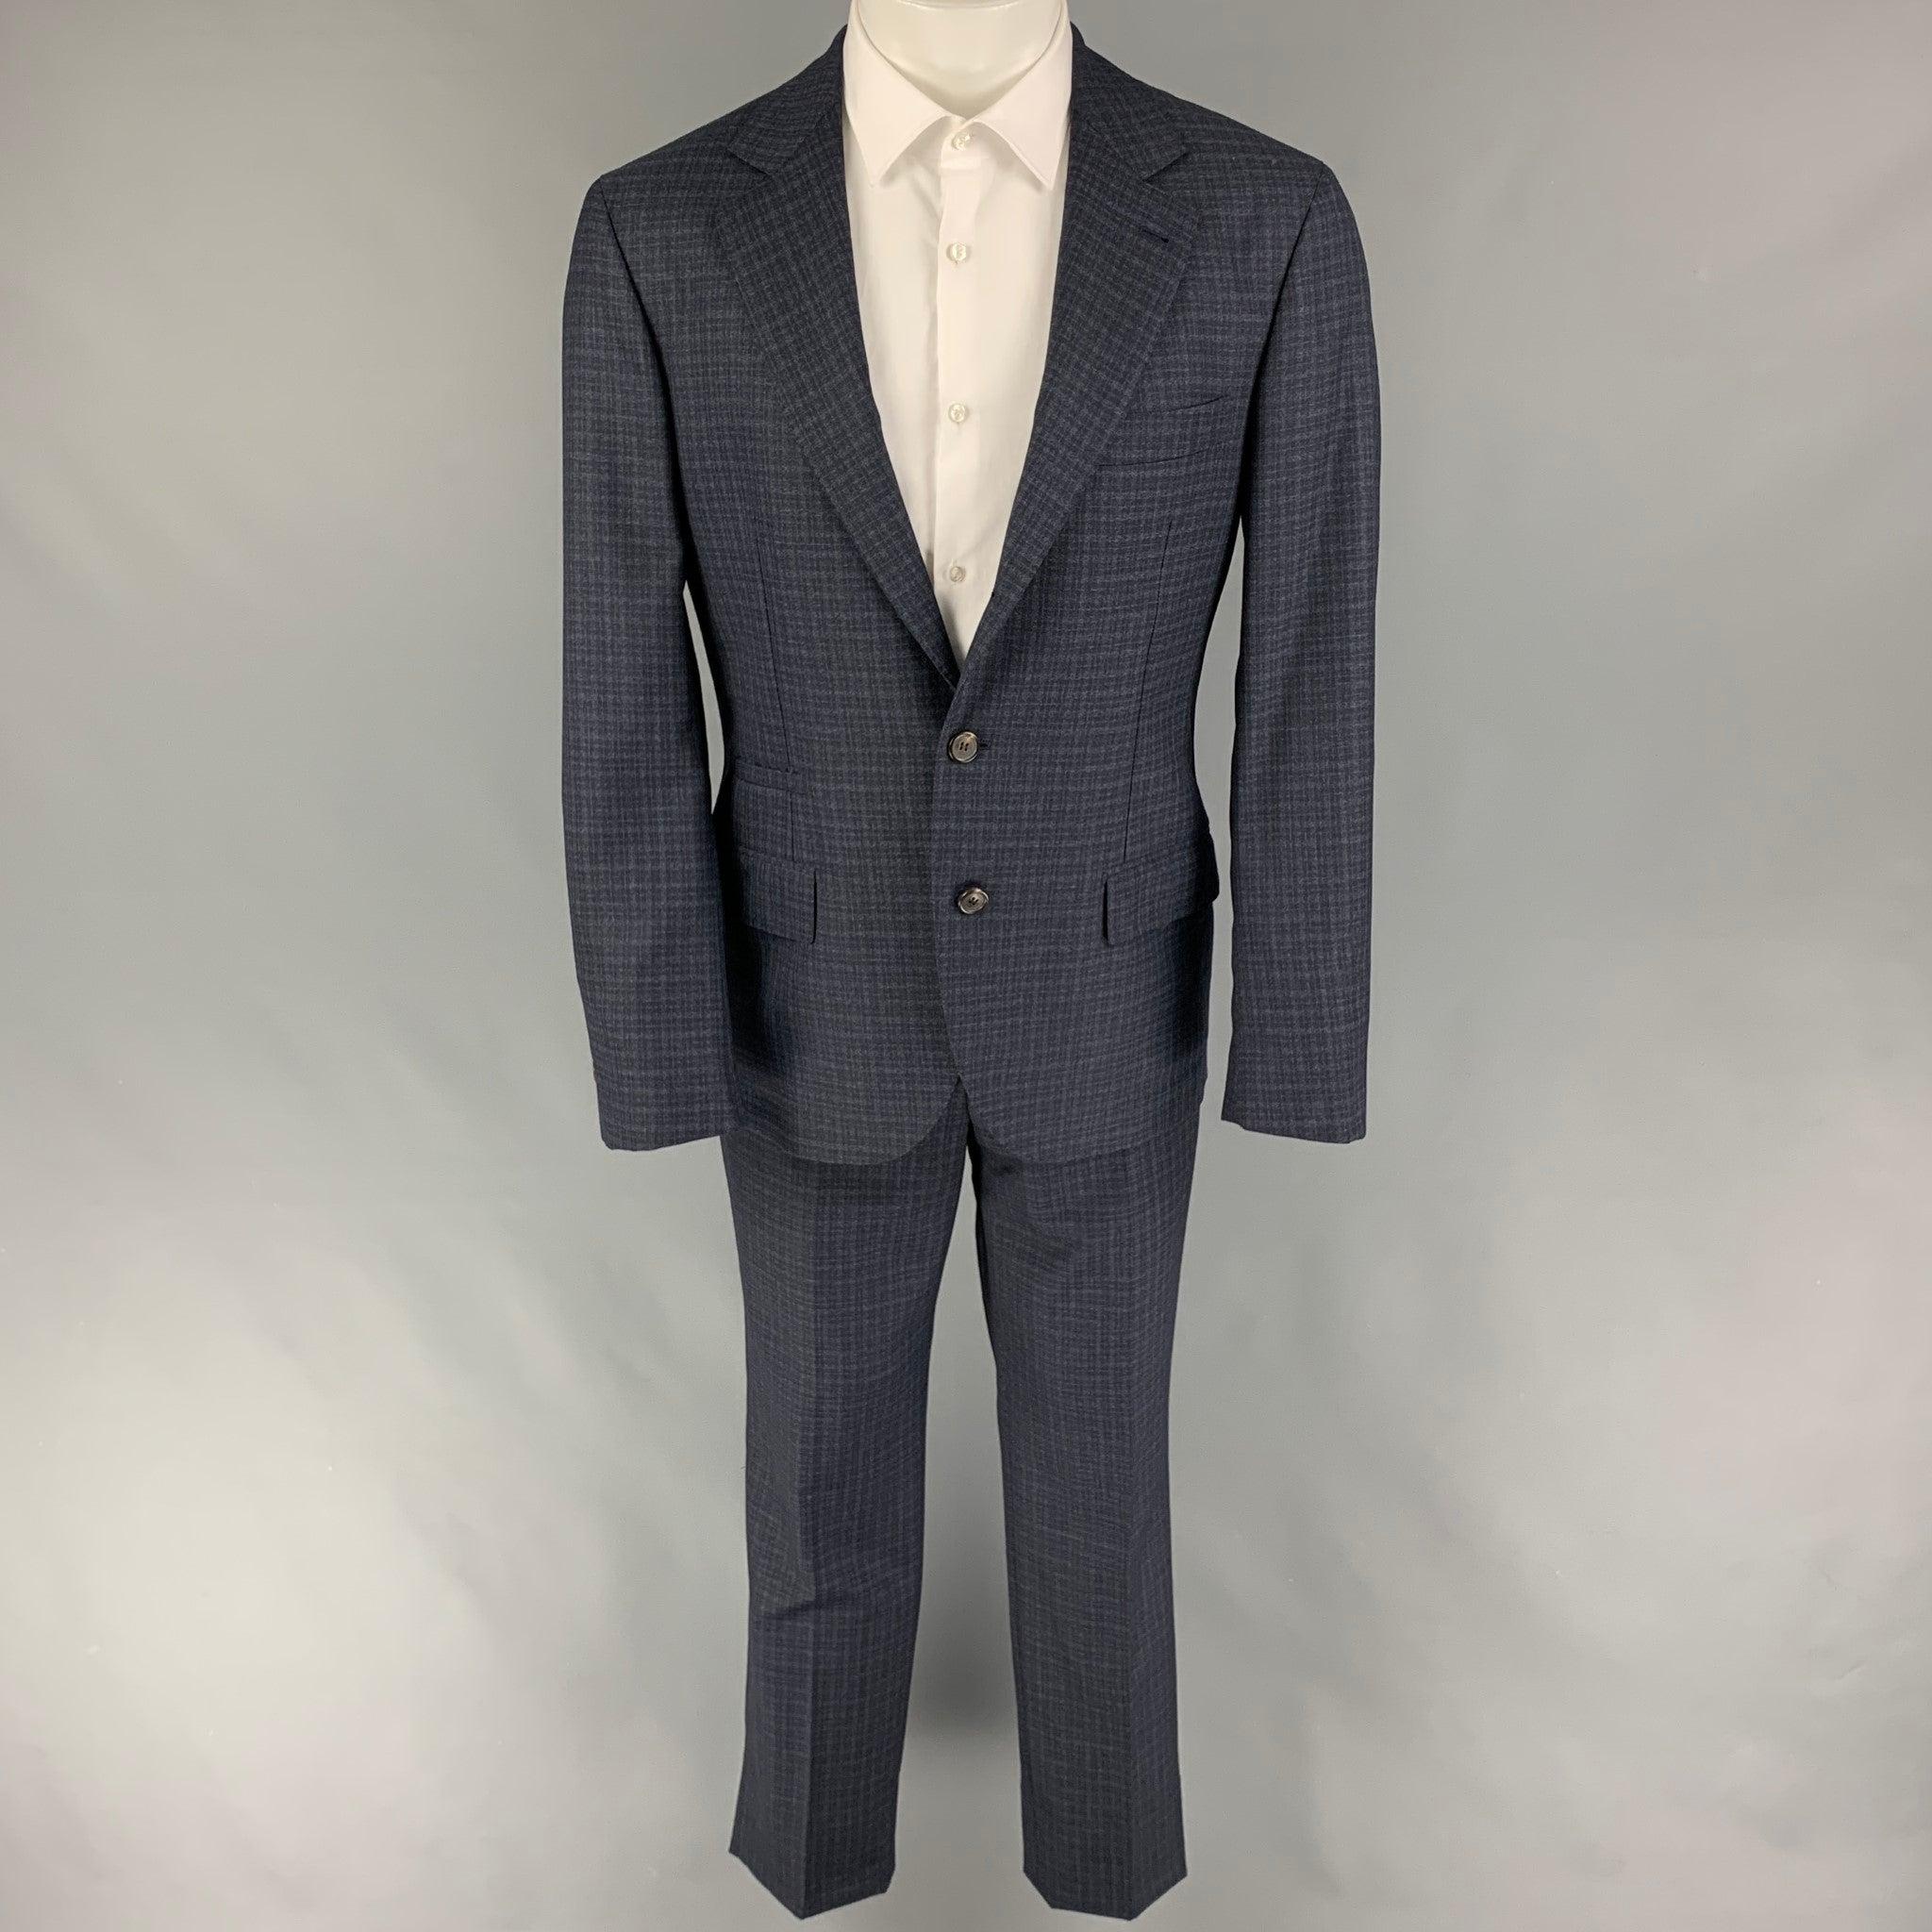 BRUNELLO CUCINELLI suit comes in a navy mouline check print lana wool with a half liner and includes a single breasted, three button sport coat with a notch lapel and matching flat front trousers. Includes garment bag. Made in Italy. New with tags. 